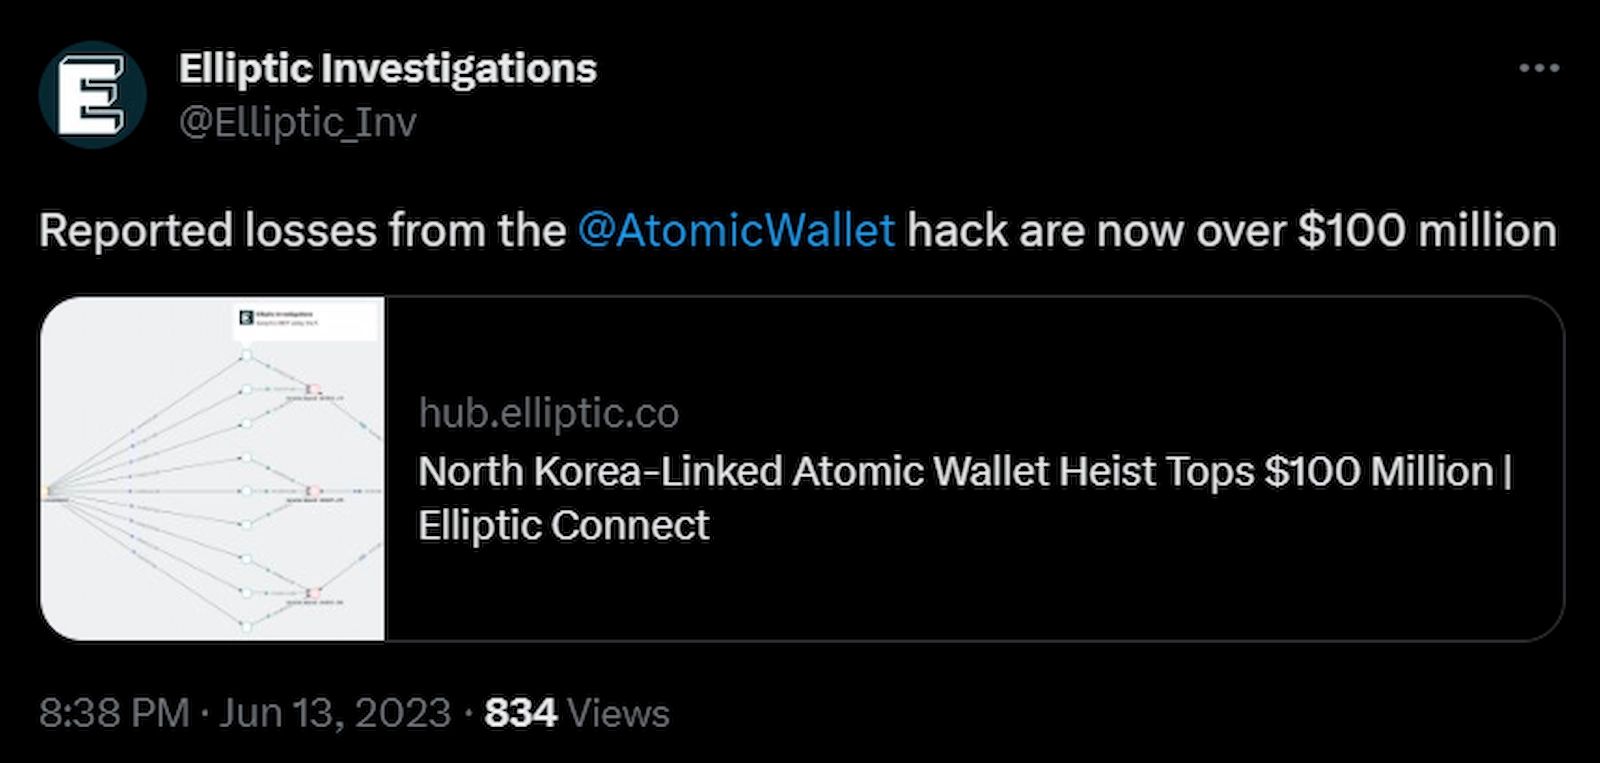 Elliptic noted that total losses from the Atomic Wallet exploit crossed $100 million